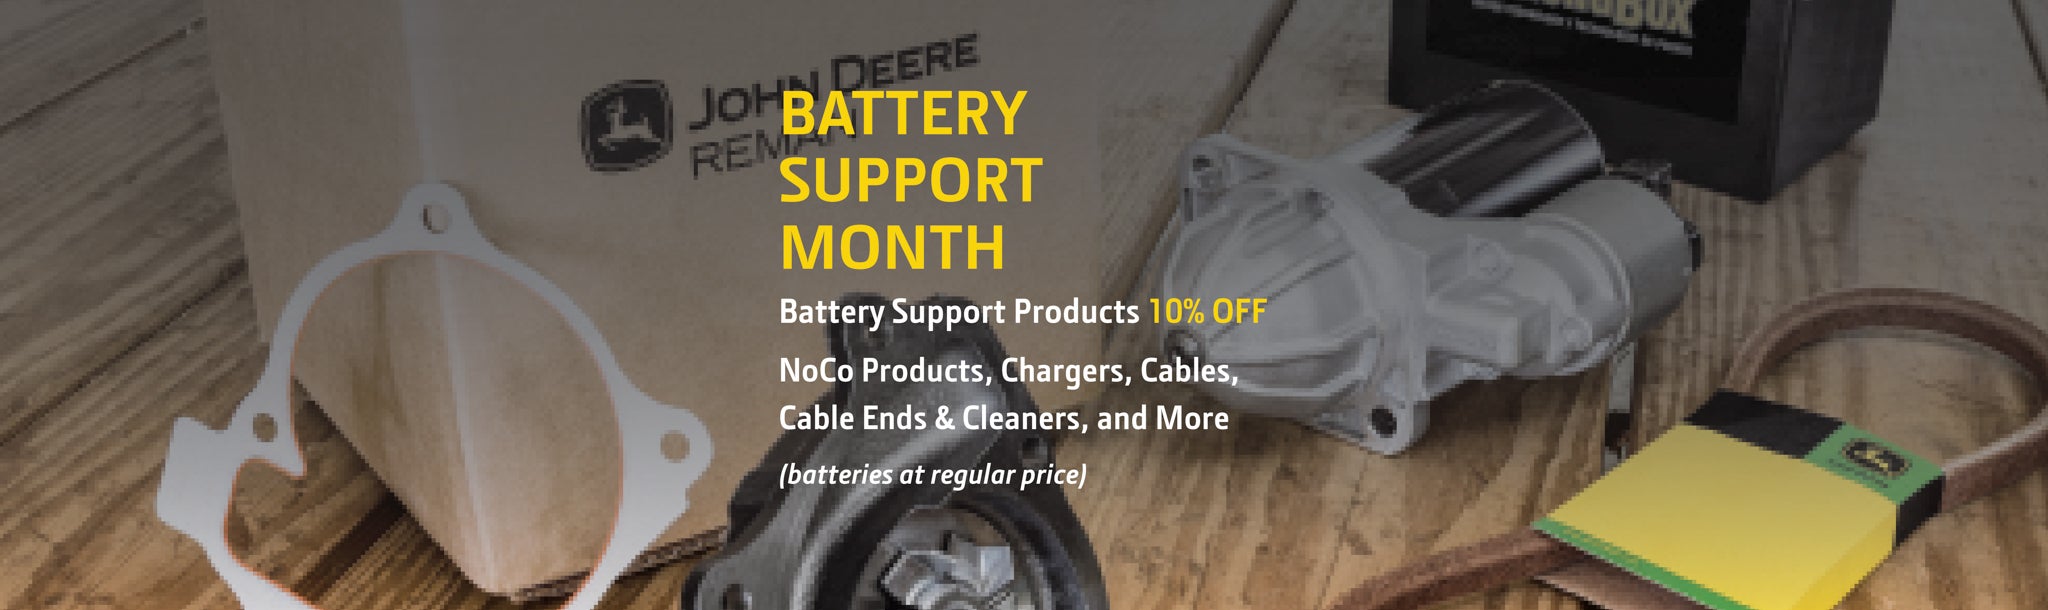 Battery Support Month